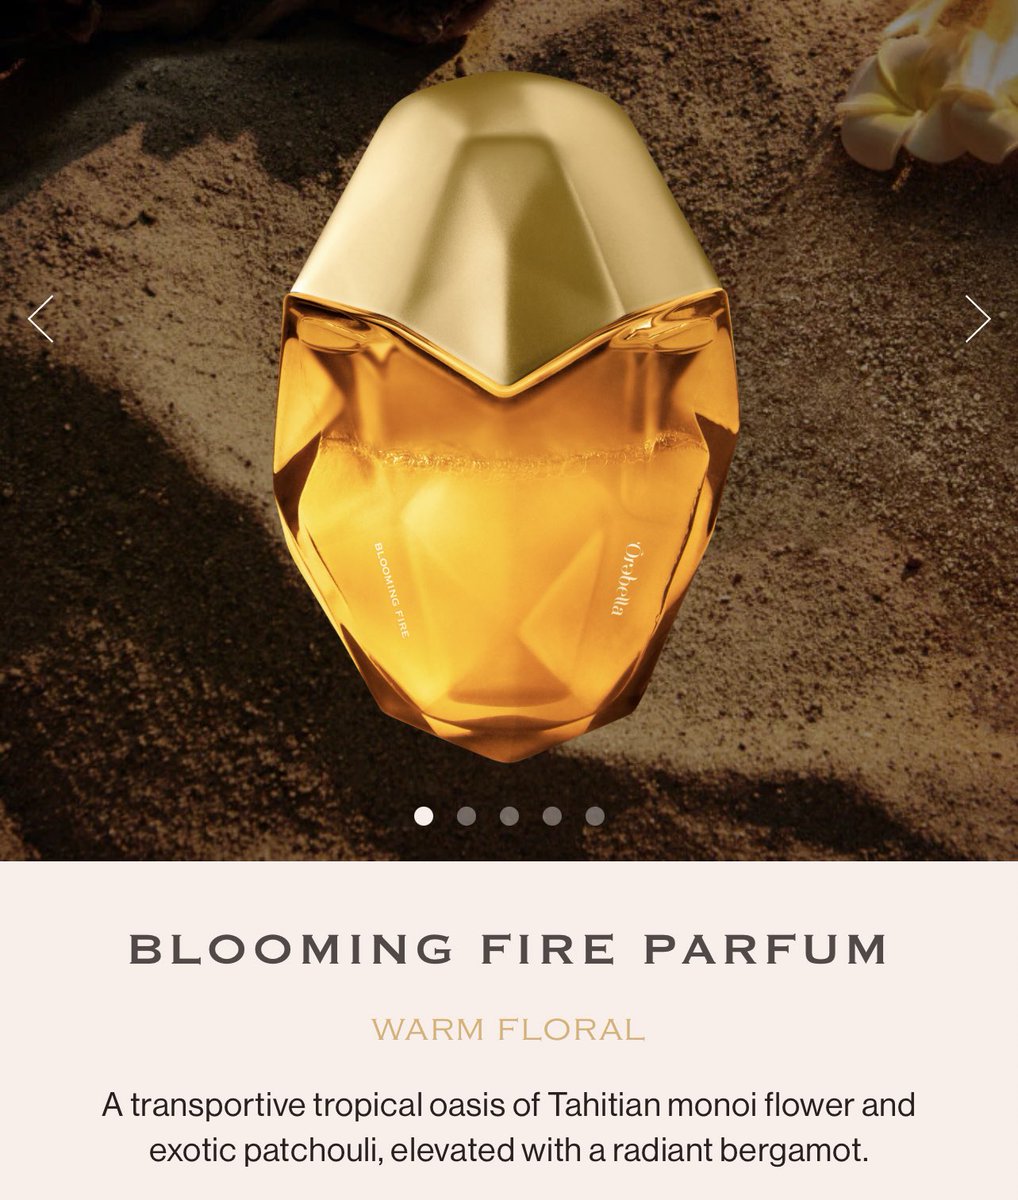 bella hadid coming out with some fragrances when i’m in my perfume era its like she read my mind. bitch i really wanna try blooming fire! i have a monoi oil and its 🤤